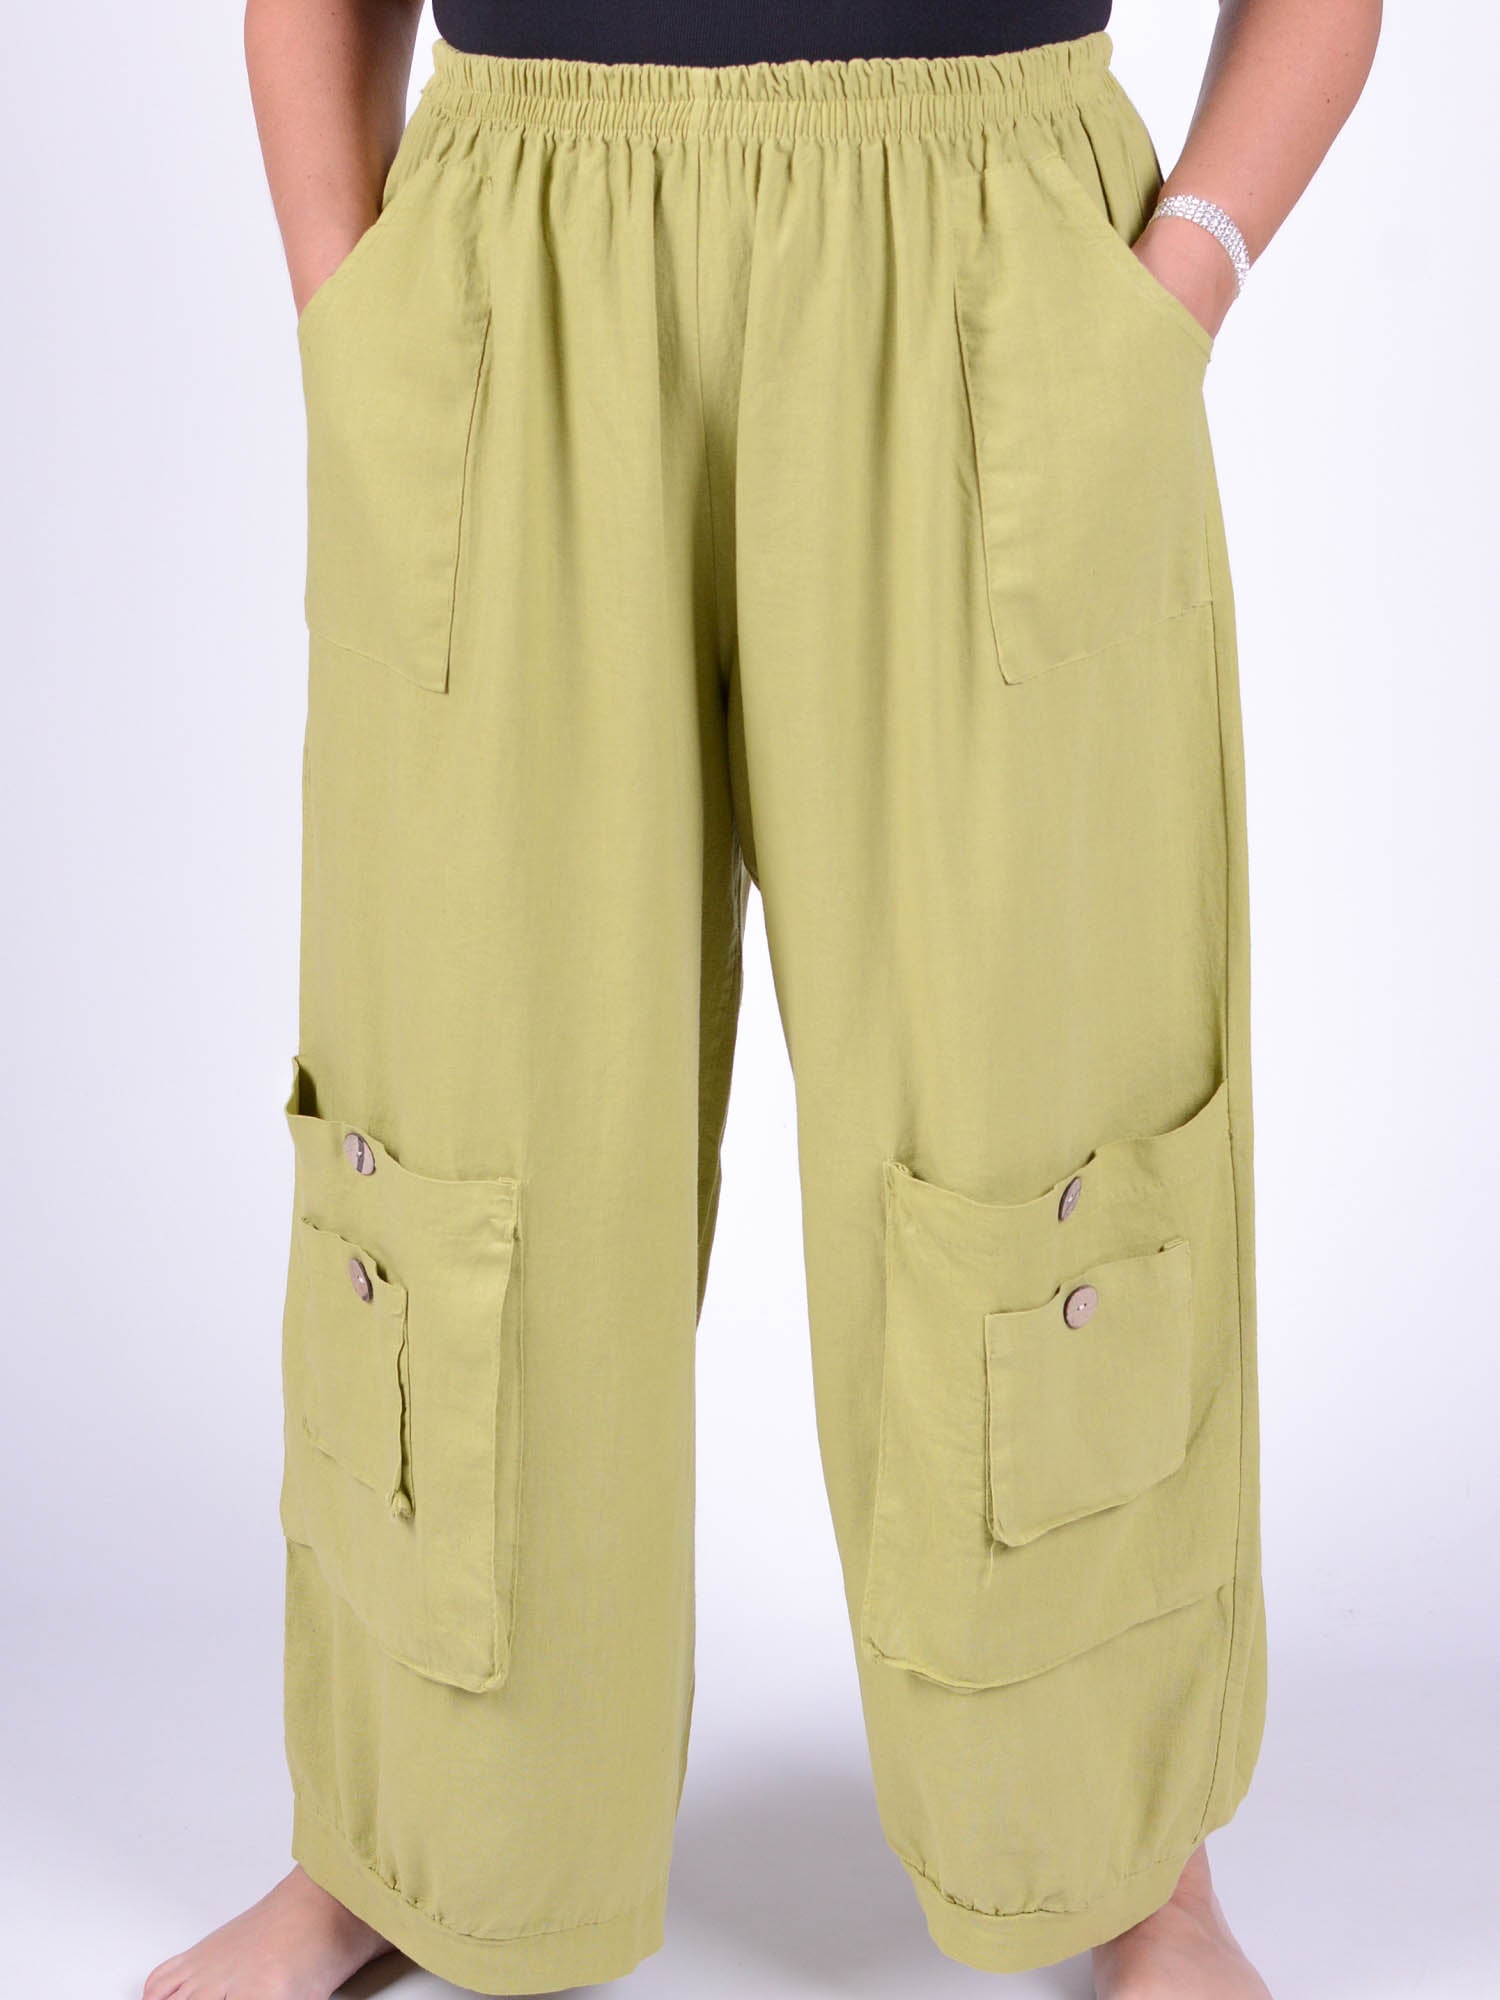 Linen Trousers with button pockets - 10034, Trousers, Pure Plus Clothing, Lagenlook Clothing, Plus Size Fashion, Over 50 Fashion